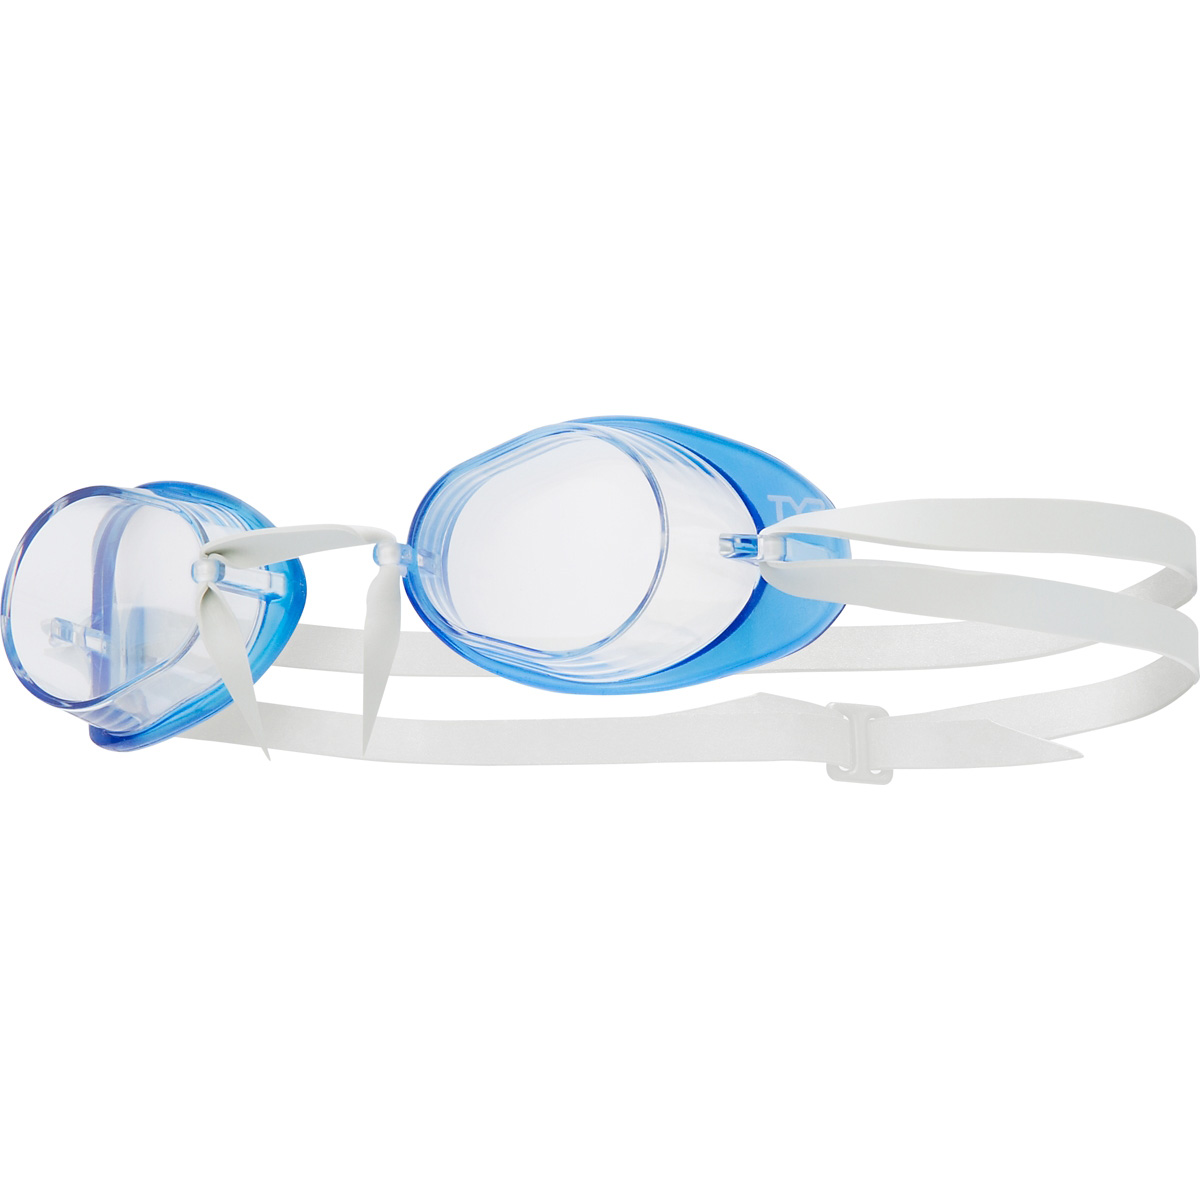 Productfoto van TYR Socket Rockets 2.0 Adult Fit Swimming Goggles - clear/blue/white